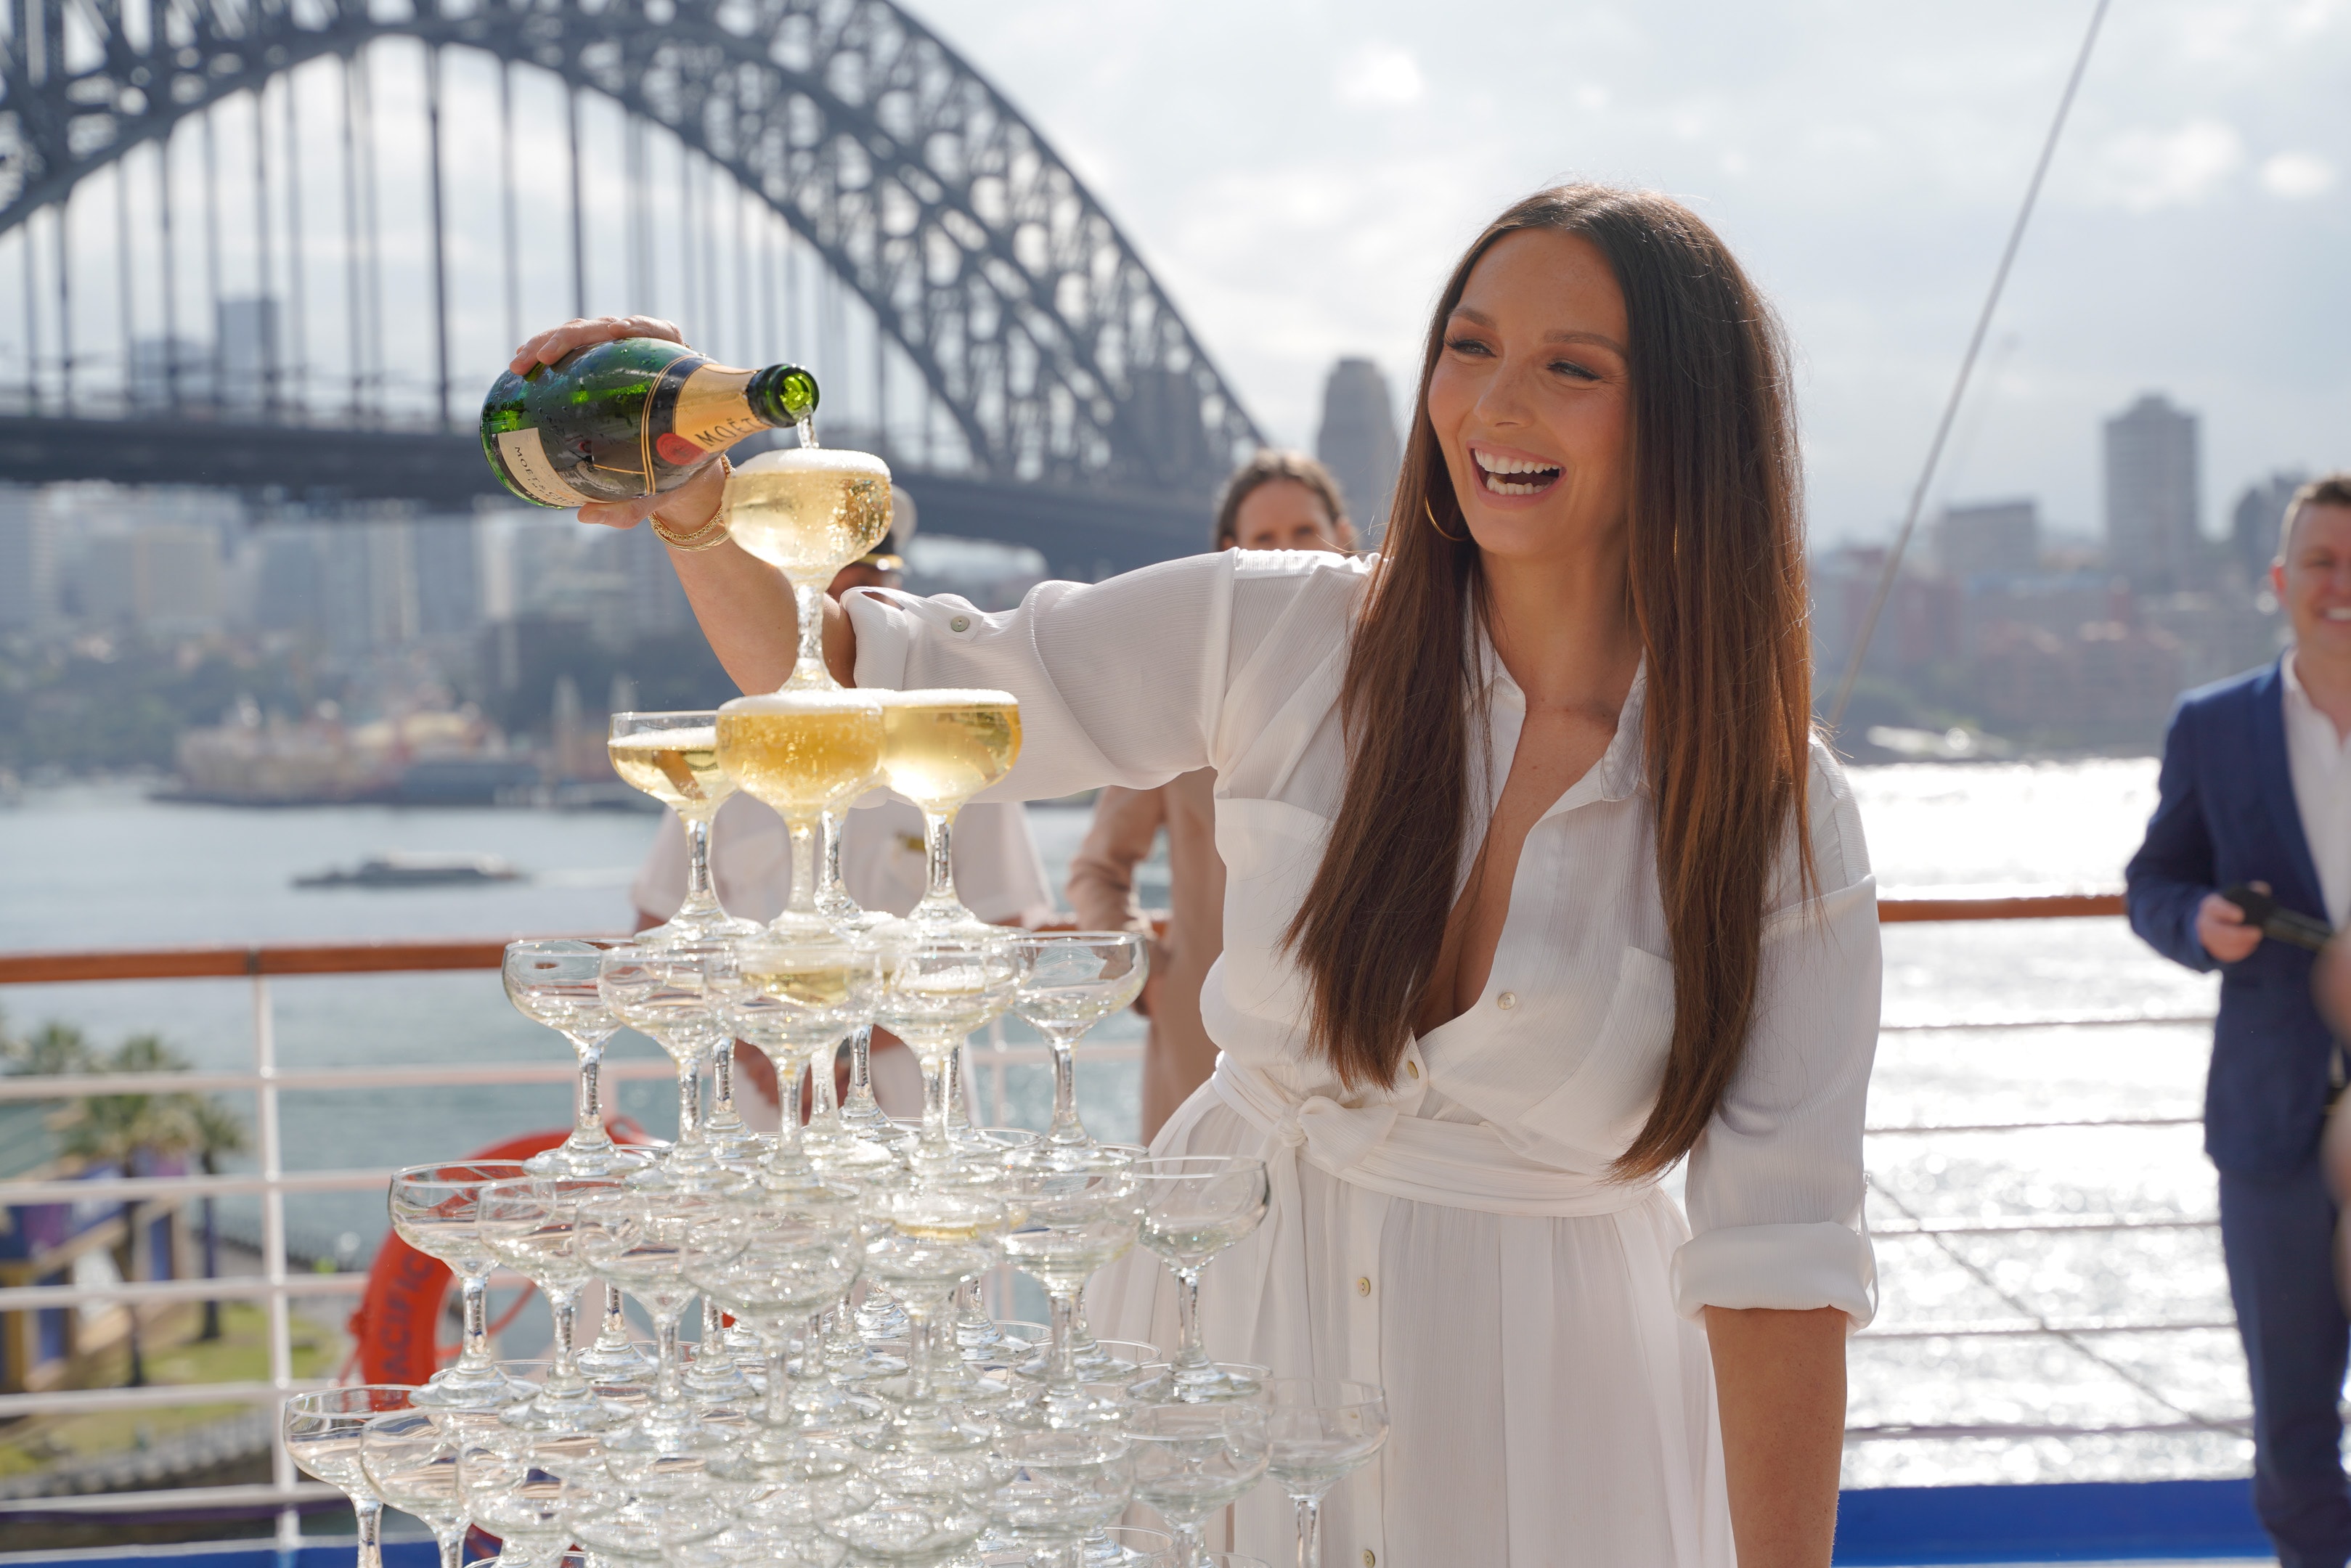 Sydney celebrates 90 years of P&O cruising - To mark the anniversary, superstar Ricki-Lee Coulter will be named Godmother to Pacific Adventure in a special on-board ceremony attended by more than 200 guests.  (Image at LateCruiseNews.com - August 2023)